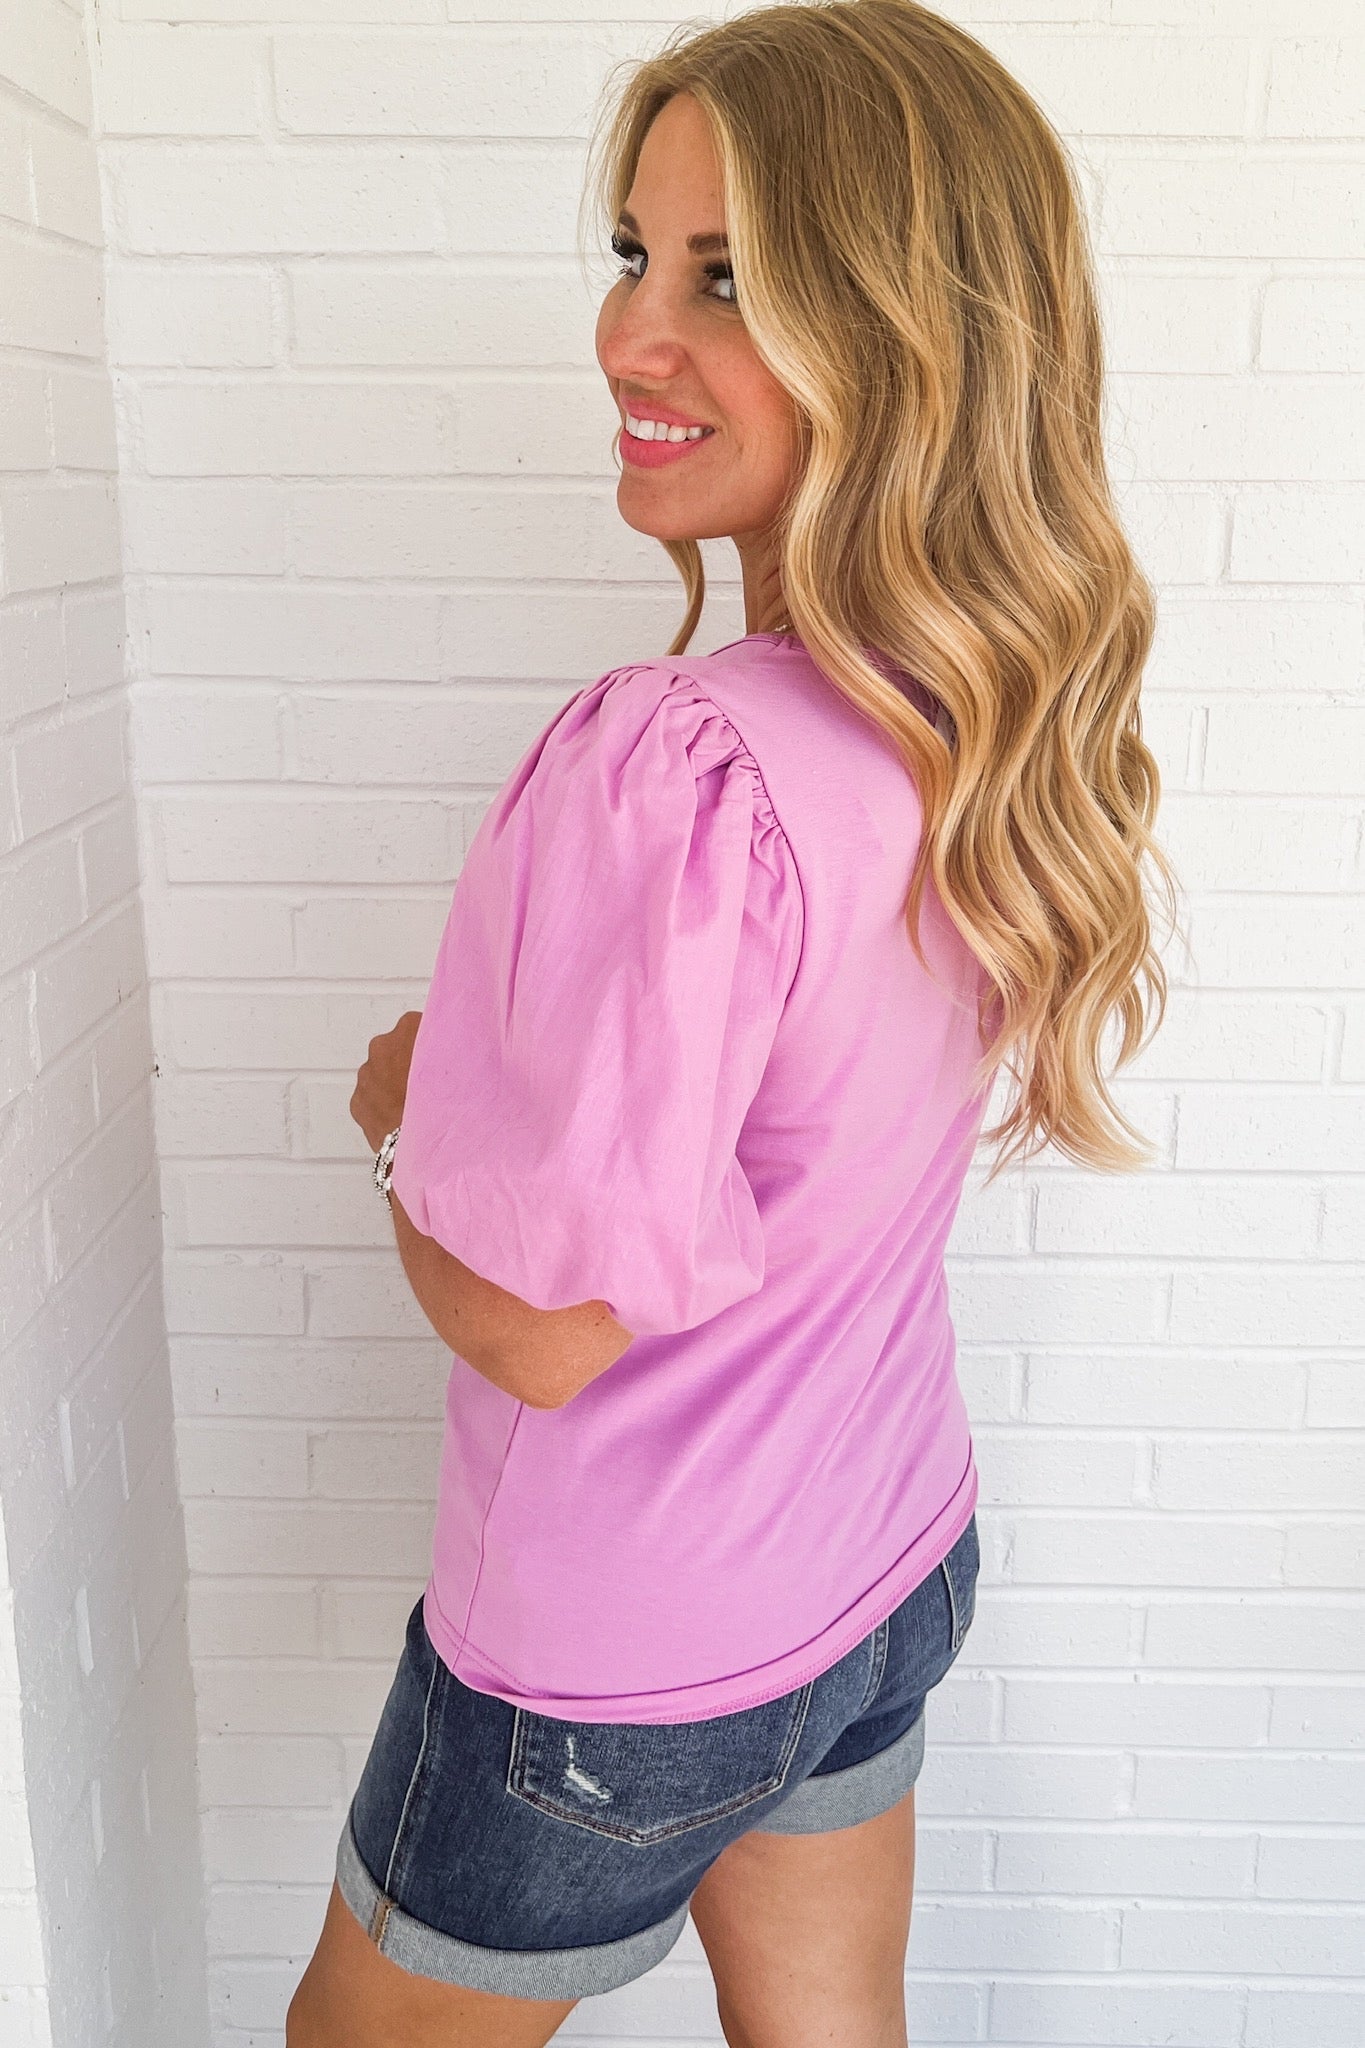 The Shay Top in Lilac by Michelle McDowell